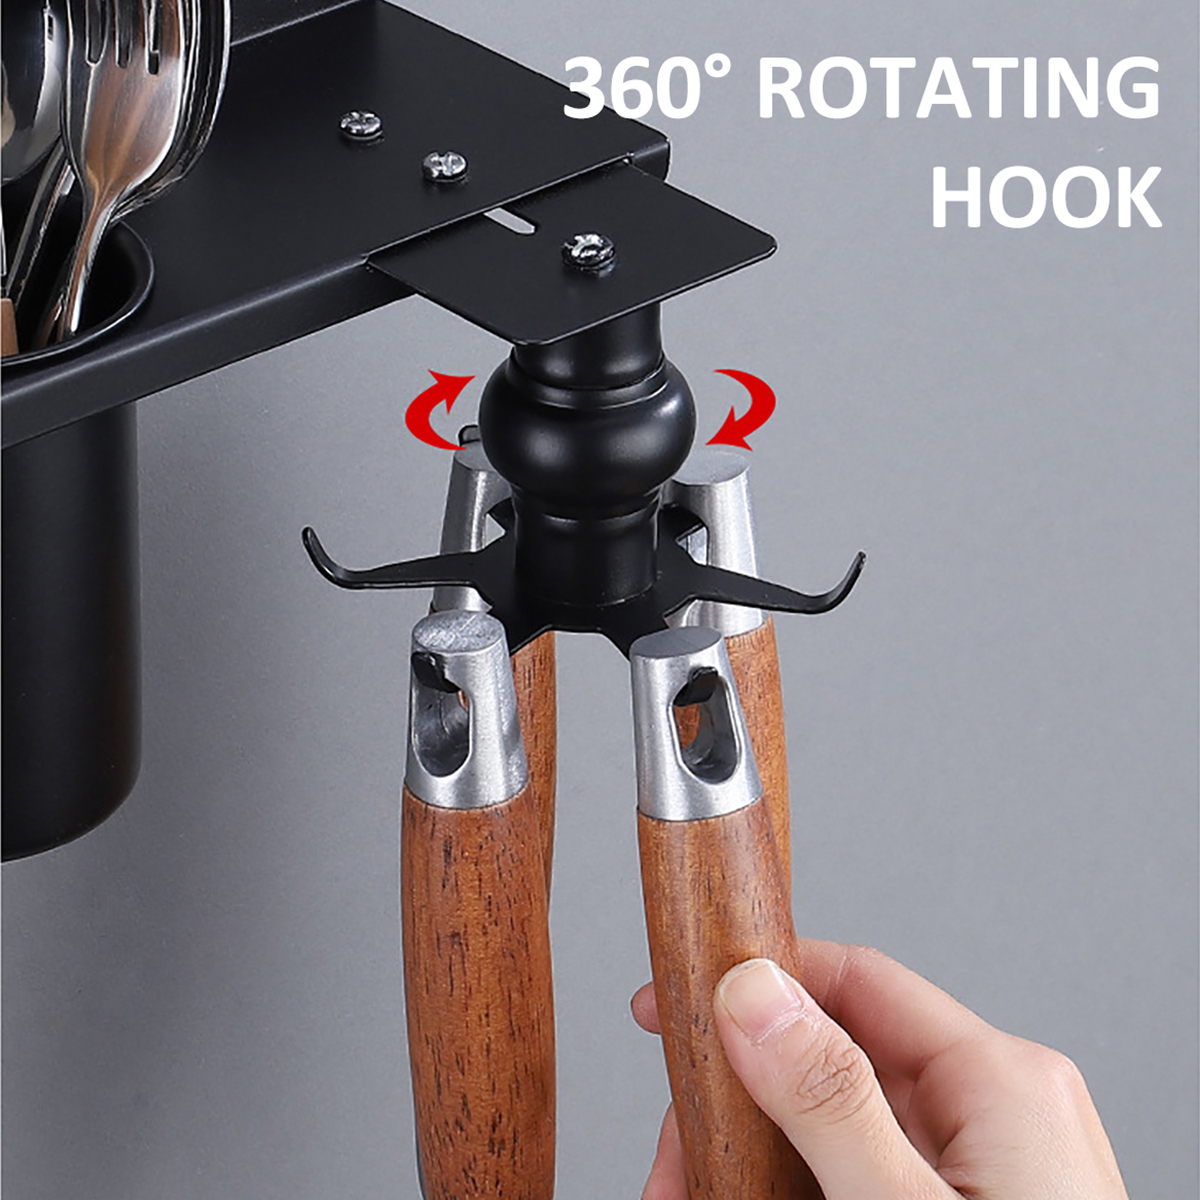 Kitchen-Wall-mounted-Storage-Rack-Stainless-Steel-360-deg-Rotating-Hook-Hanging-Racks-for-Cutter-Cho-1786668-3